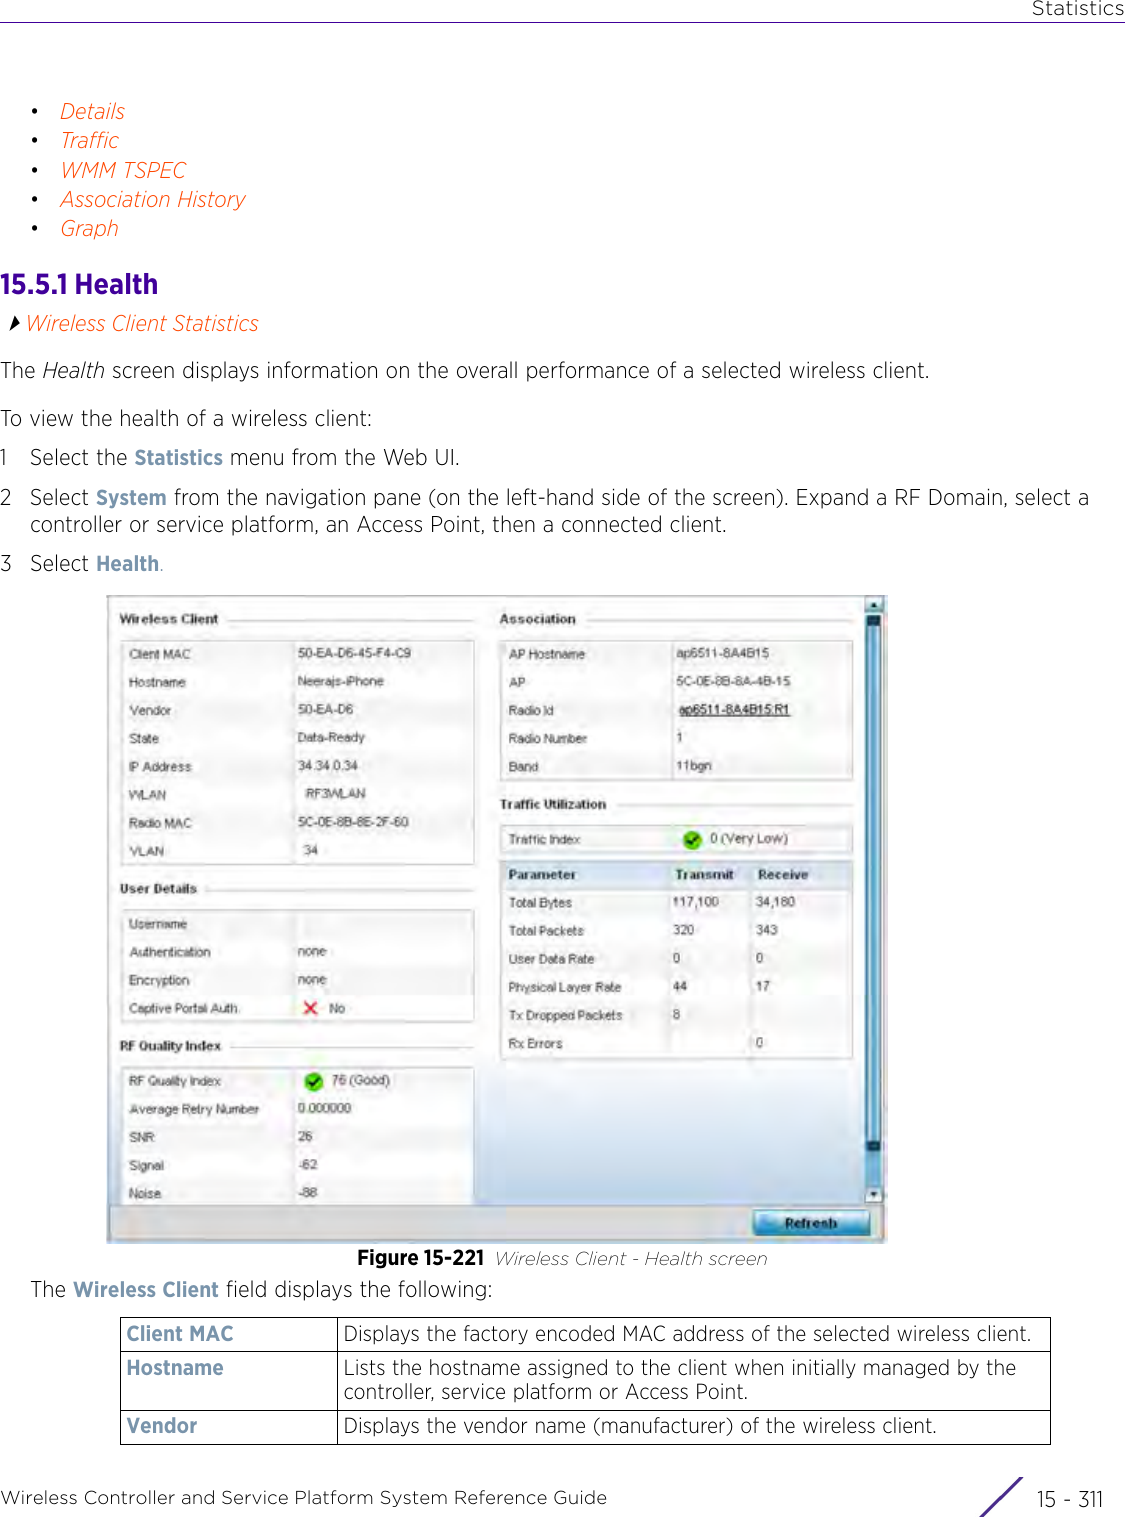 StatisticsWireless Controller and Service Platform System Reference Guide 15 - 311•Details•Traffic•WMM TSPEC•Association History•Graph15.5.1 HealthWireless Client StatisticsThe Health screen displays information on the overall performance of a selected wireless client.To view the health of a wireless client: 1 Select the Statistics menu from the Web UI.2Select System from the navigation pane (on the left-hand side of the screen). Expand a RF Domain, select a controller or service platform, an Access Point, then a connected client.3Select Health.Figure 15-221 Wireless Client - Health screenThe Wireless Client field displays the following:Client MAC Displays the factory encoded MAC address of the selected wireless client.Hostname Lists the hostname assigned to the client when initially managed by the controller, service platform or Access Point.Vendor Displays the vendor name (manufacturer) of the wireless client.